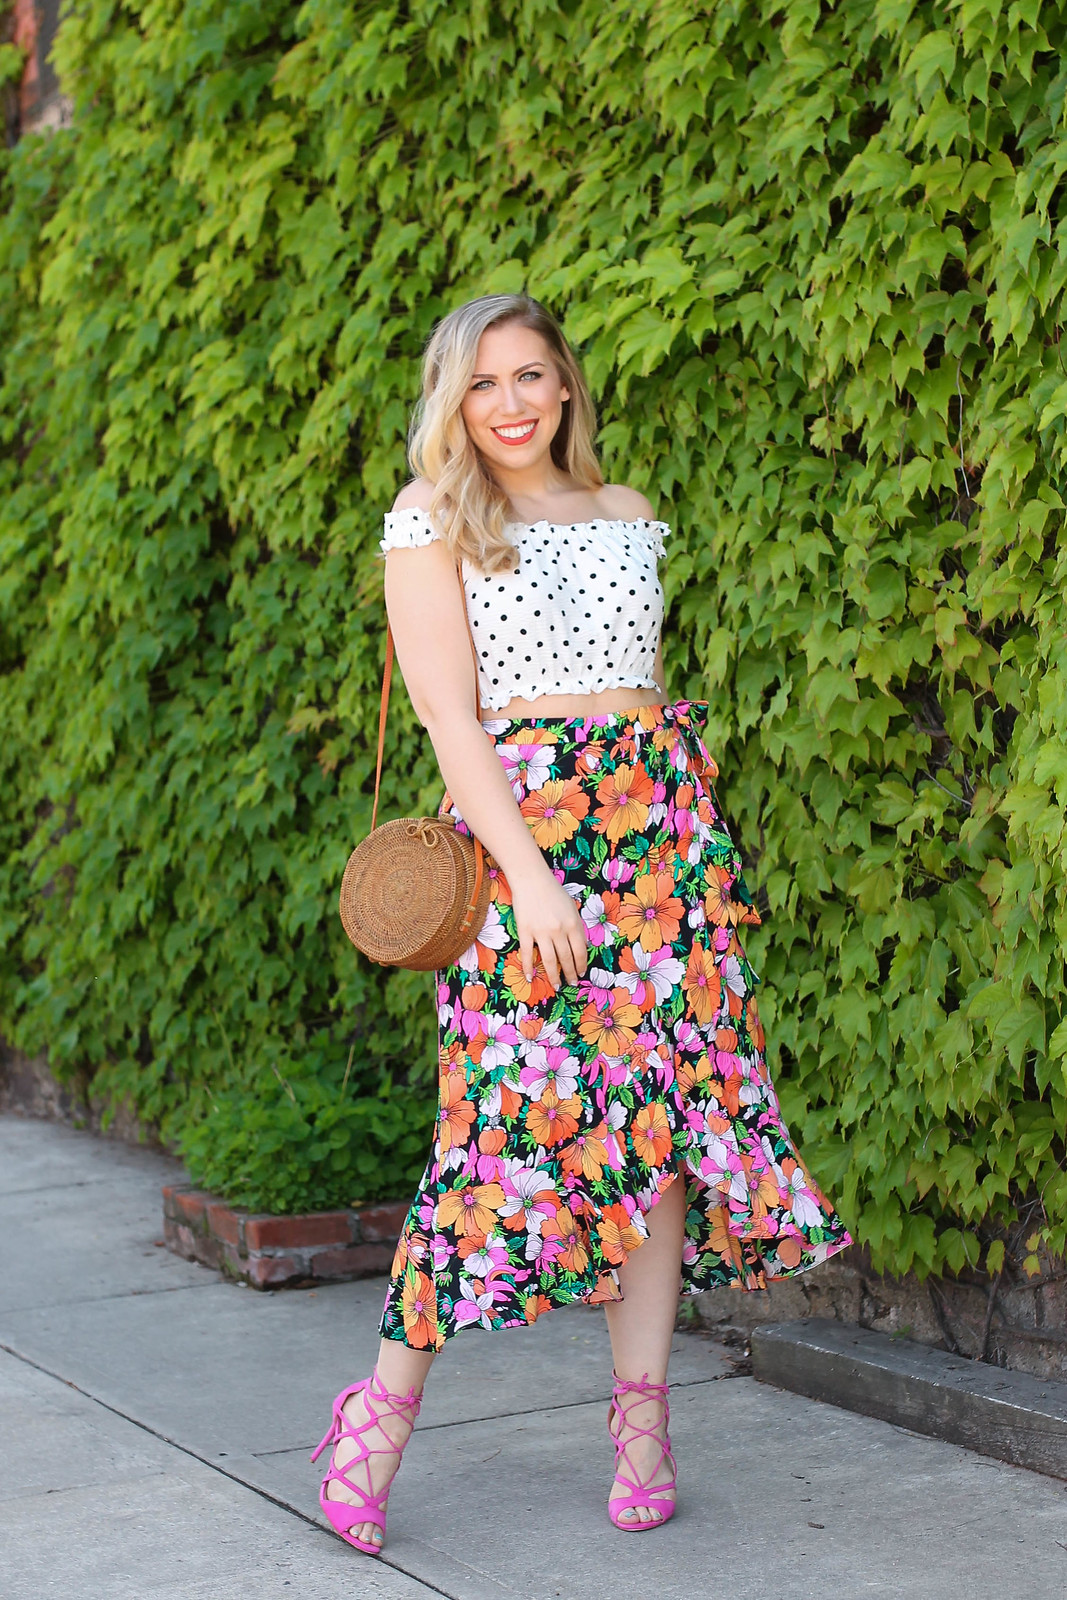 Topshop Polka Dot Crop Top Bright Tropical Petal Midi Skirt Nordstrom Westchester Vacation Outfit Fashion Pink Lace Up Sandals Jackie Giardina Living After Midnite